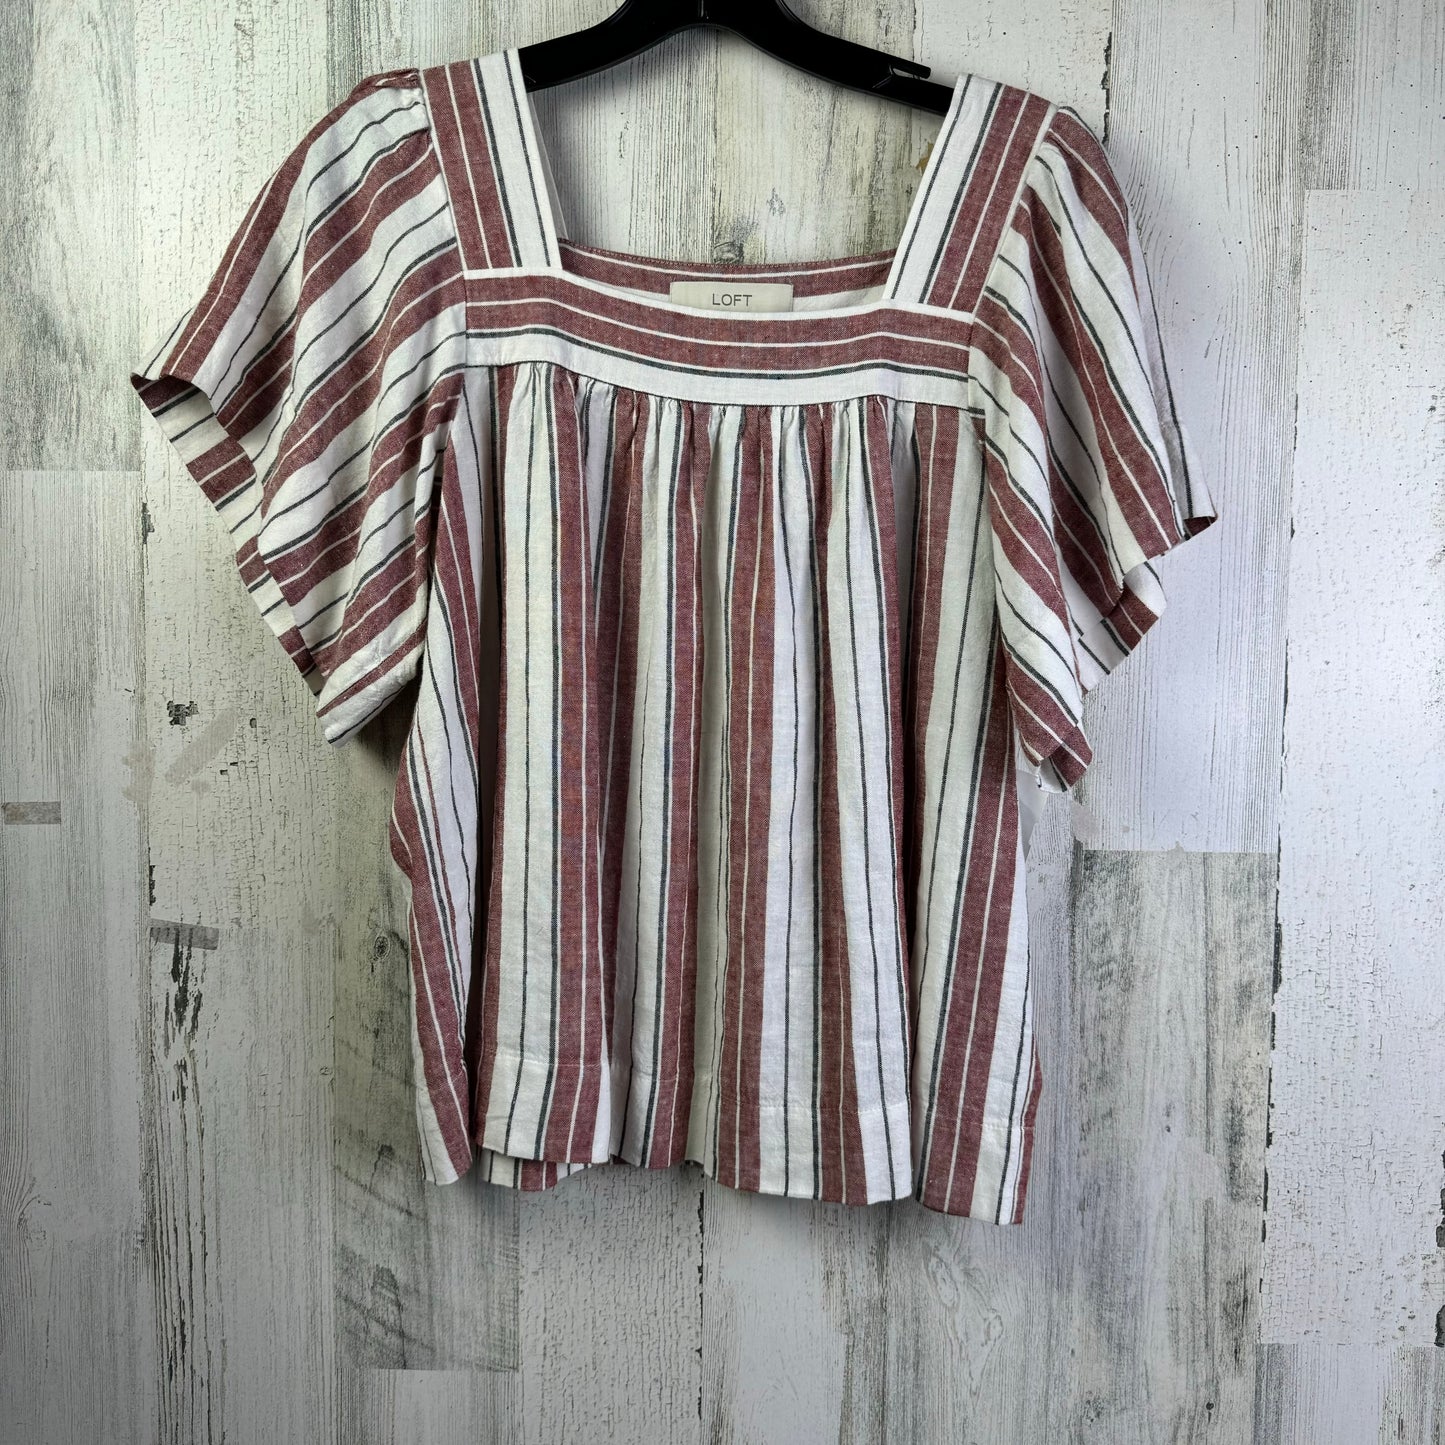 Red & White Top Short Sleeve Loft, Size Xs